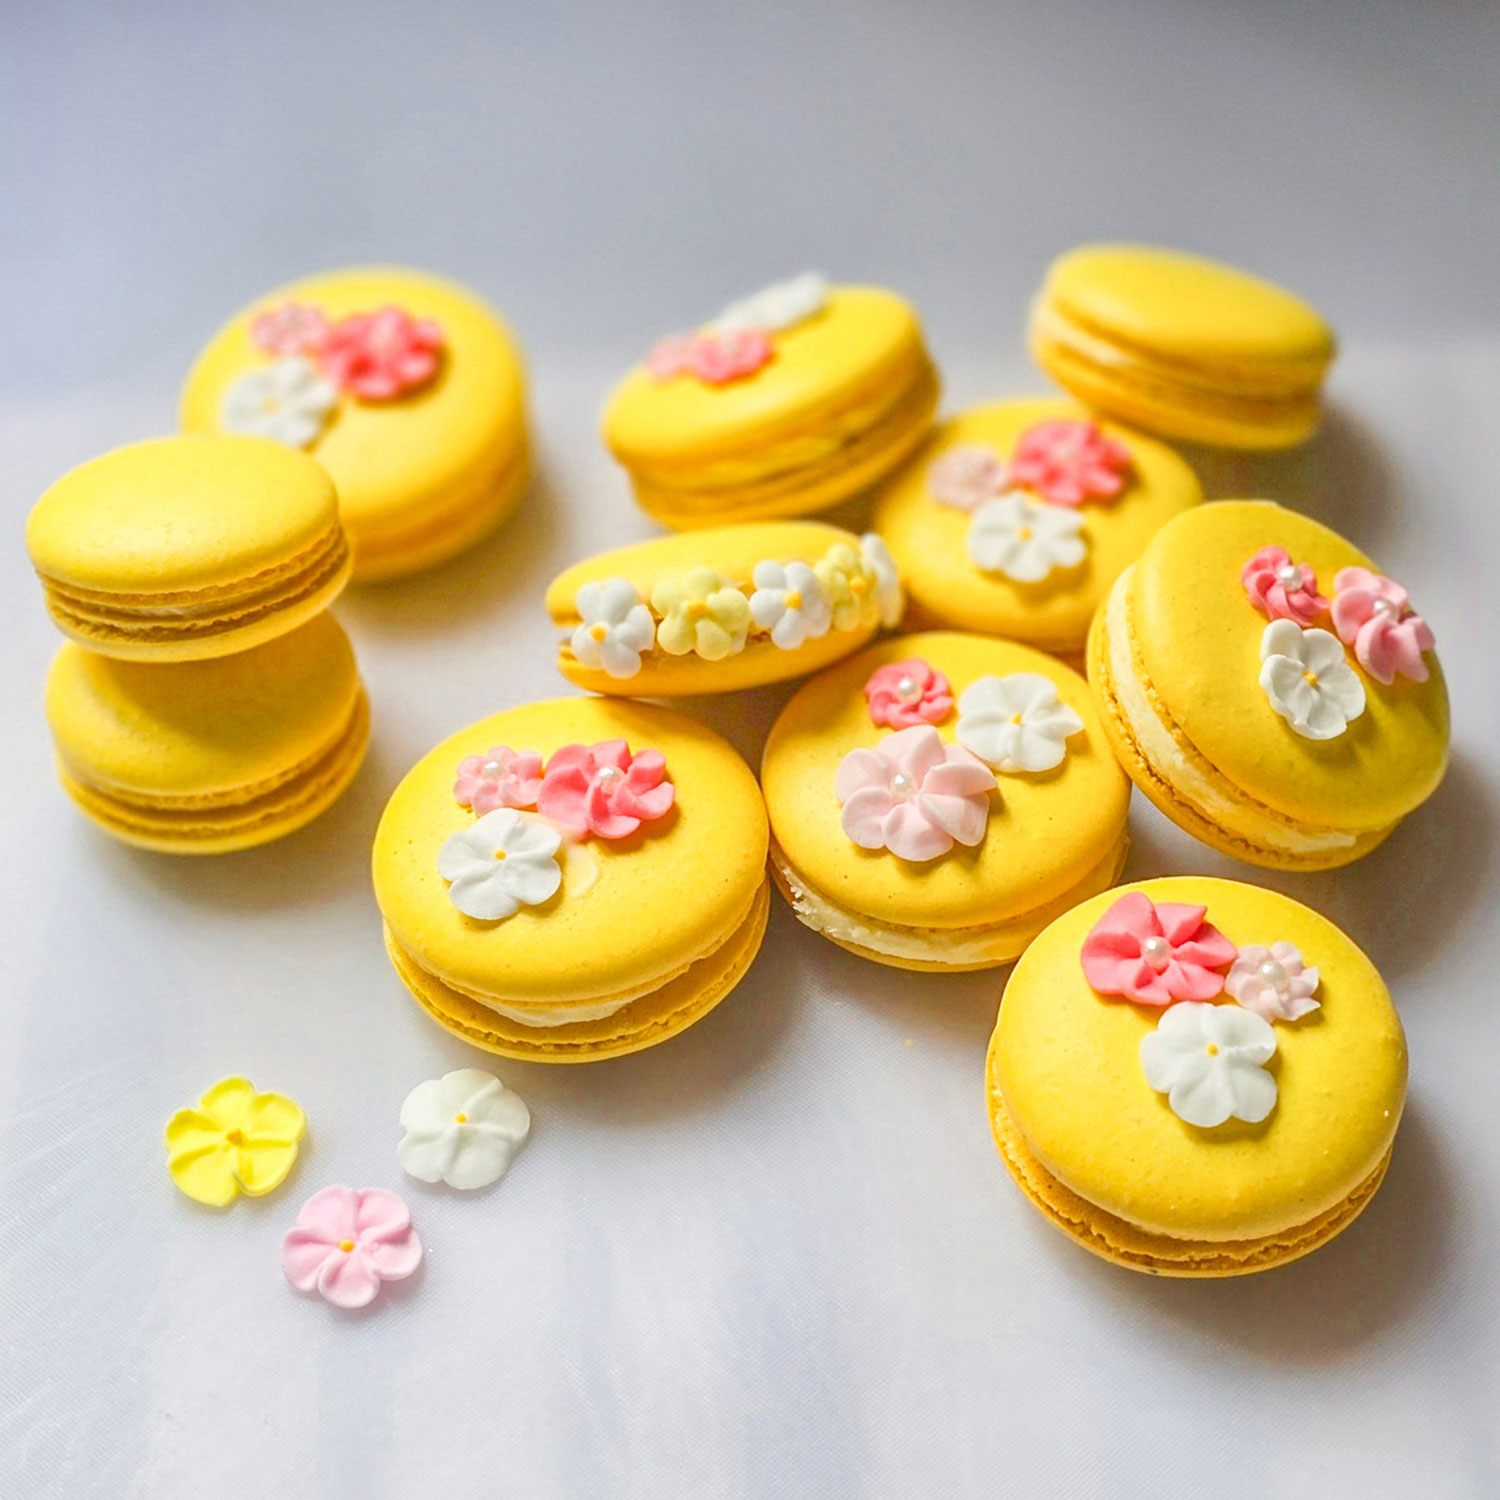 lemon macarons decorated with sugar flowers